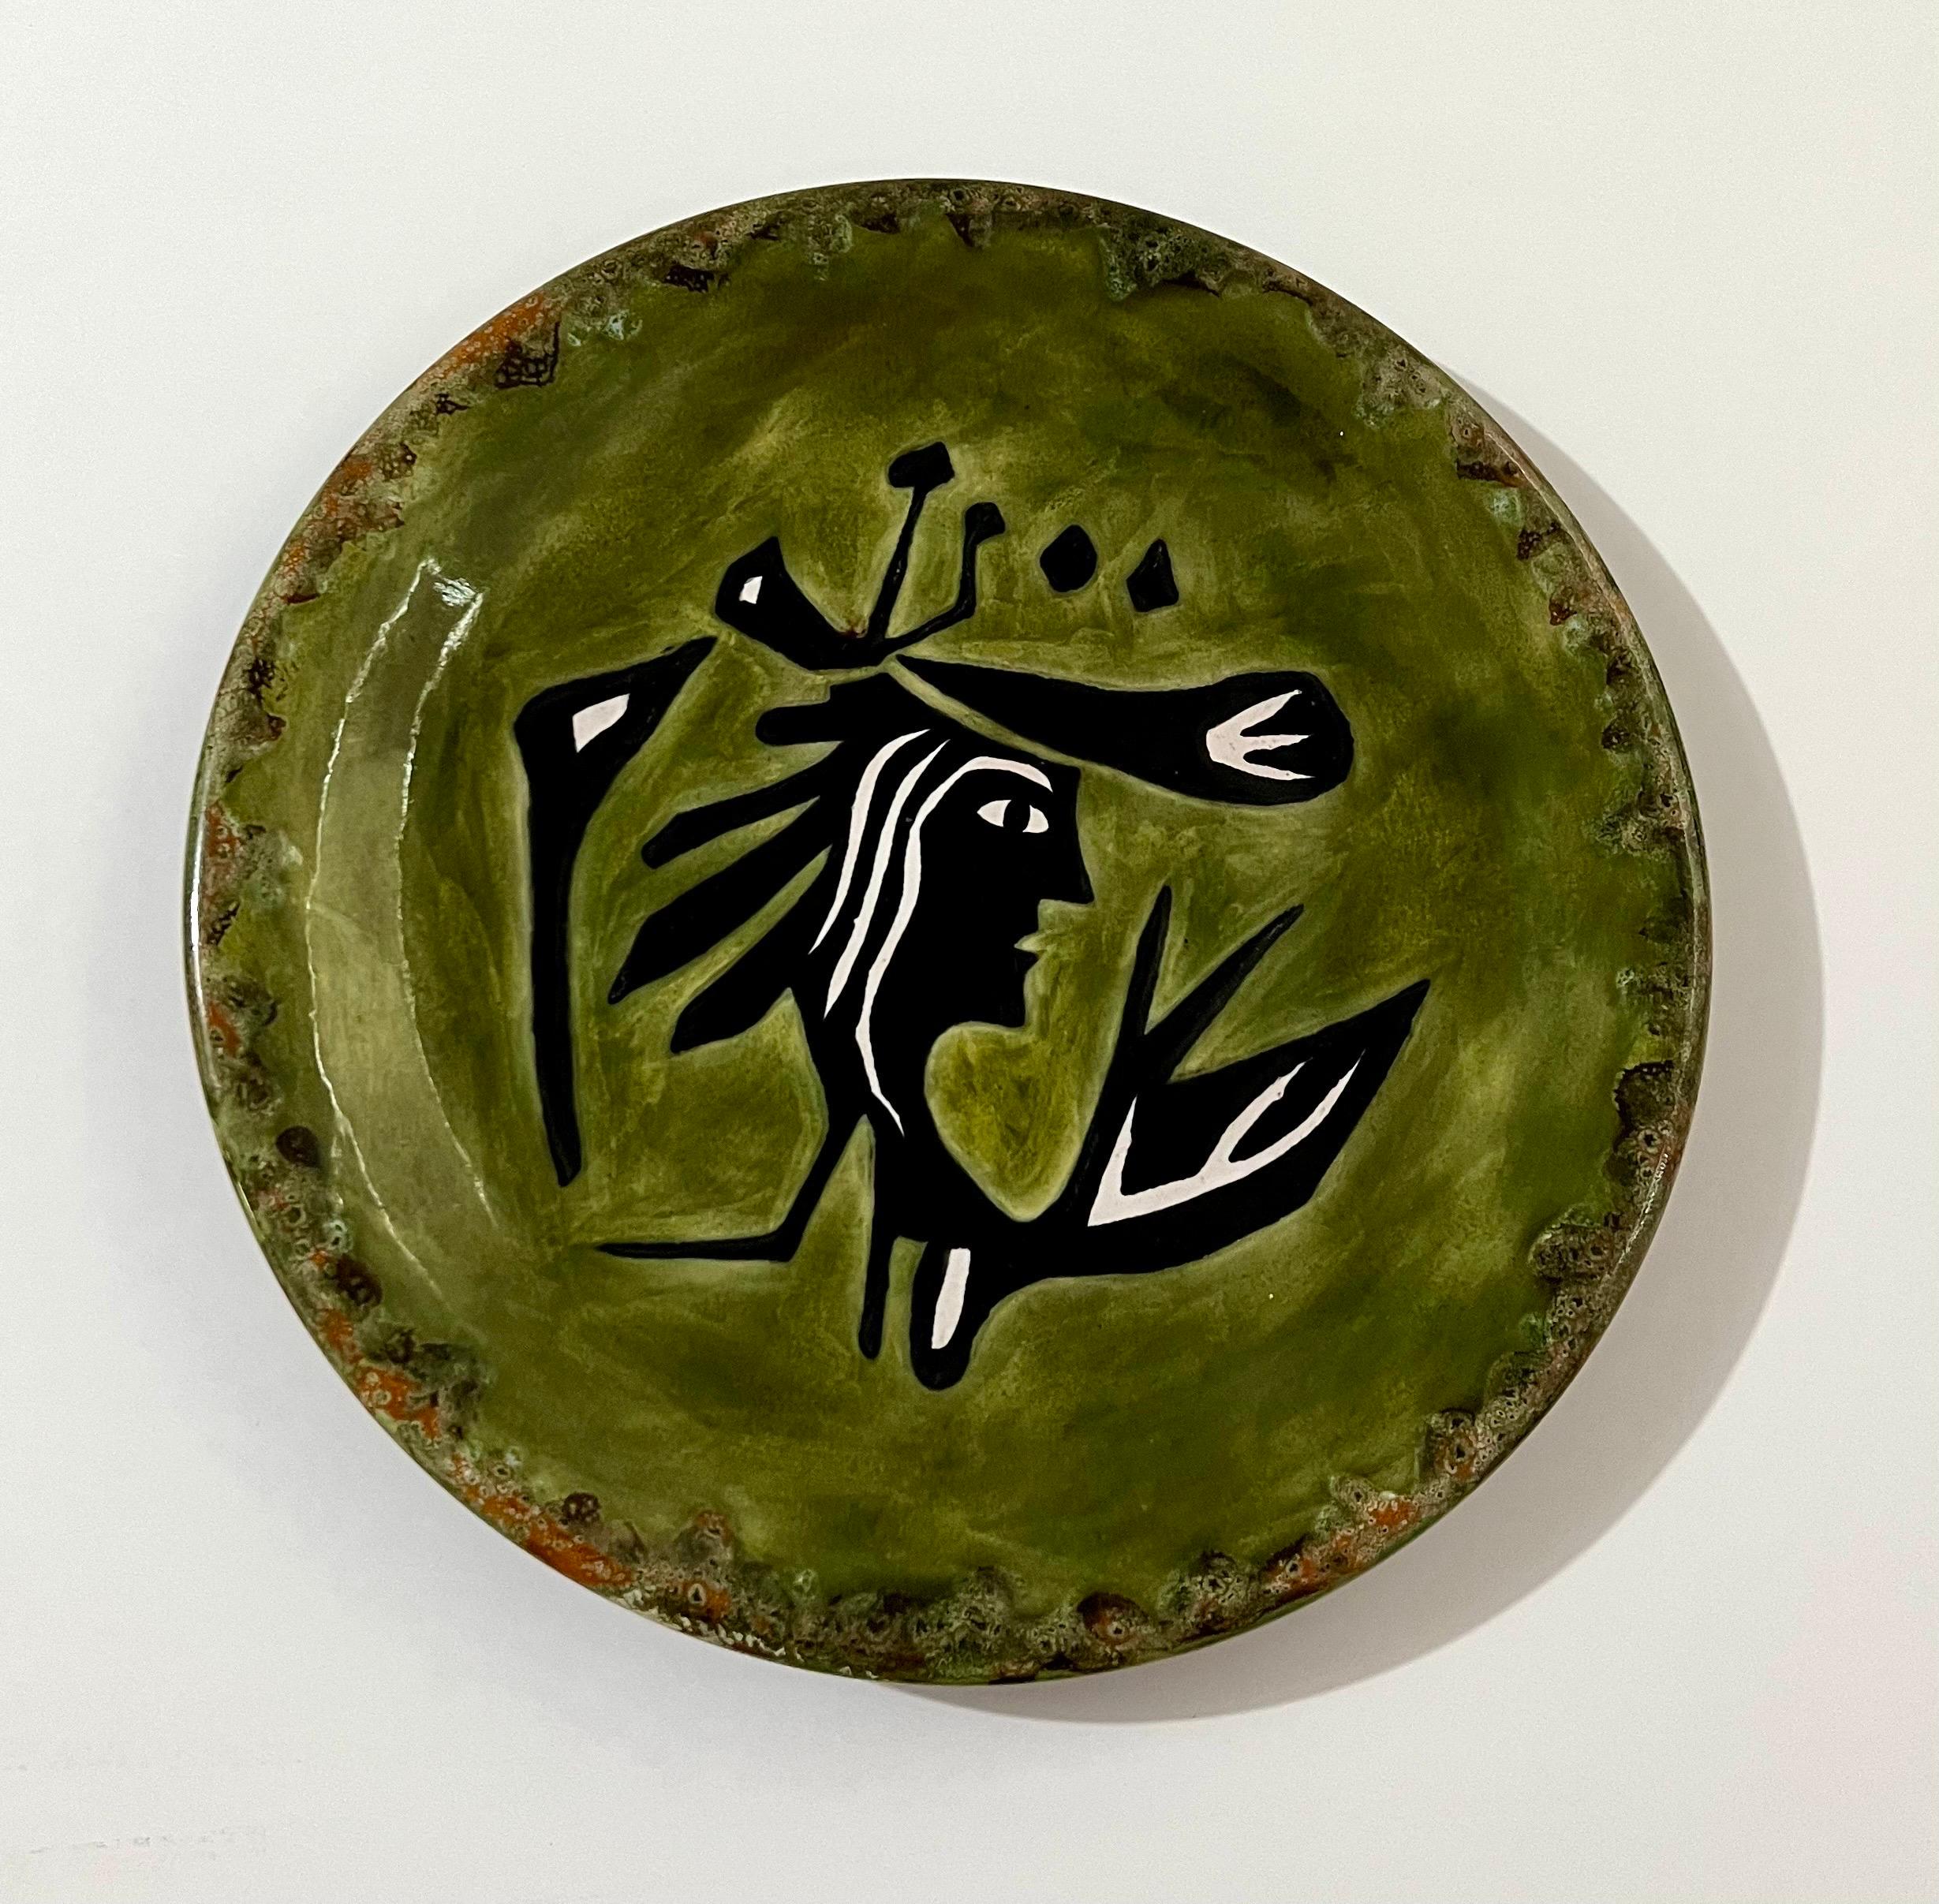 Vintage Jean Lurcat glazed fired enamel wall plaque ceramic plate limited edition hand inscribed faience Ceramique Saint Vicens charger.  It depicts a highly stylized figure of a woman in bright, vibrant moss green color.
Jean Lurçat (French: 1892 –